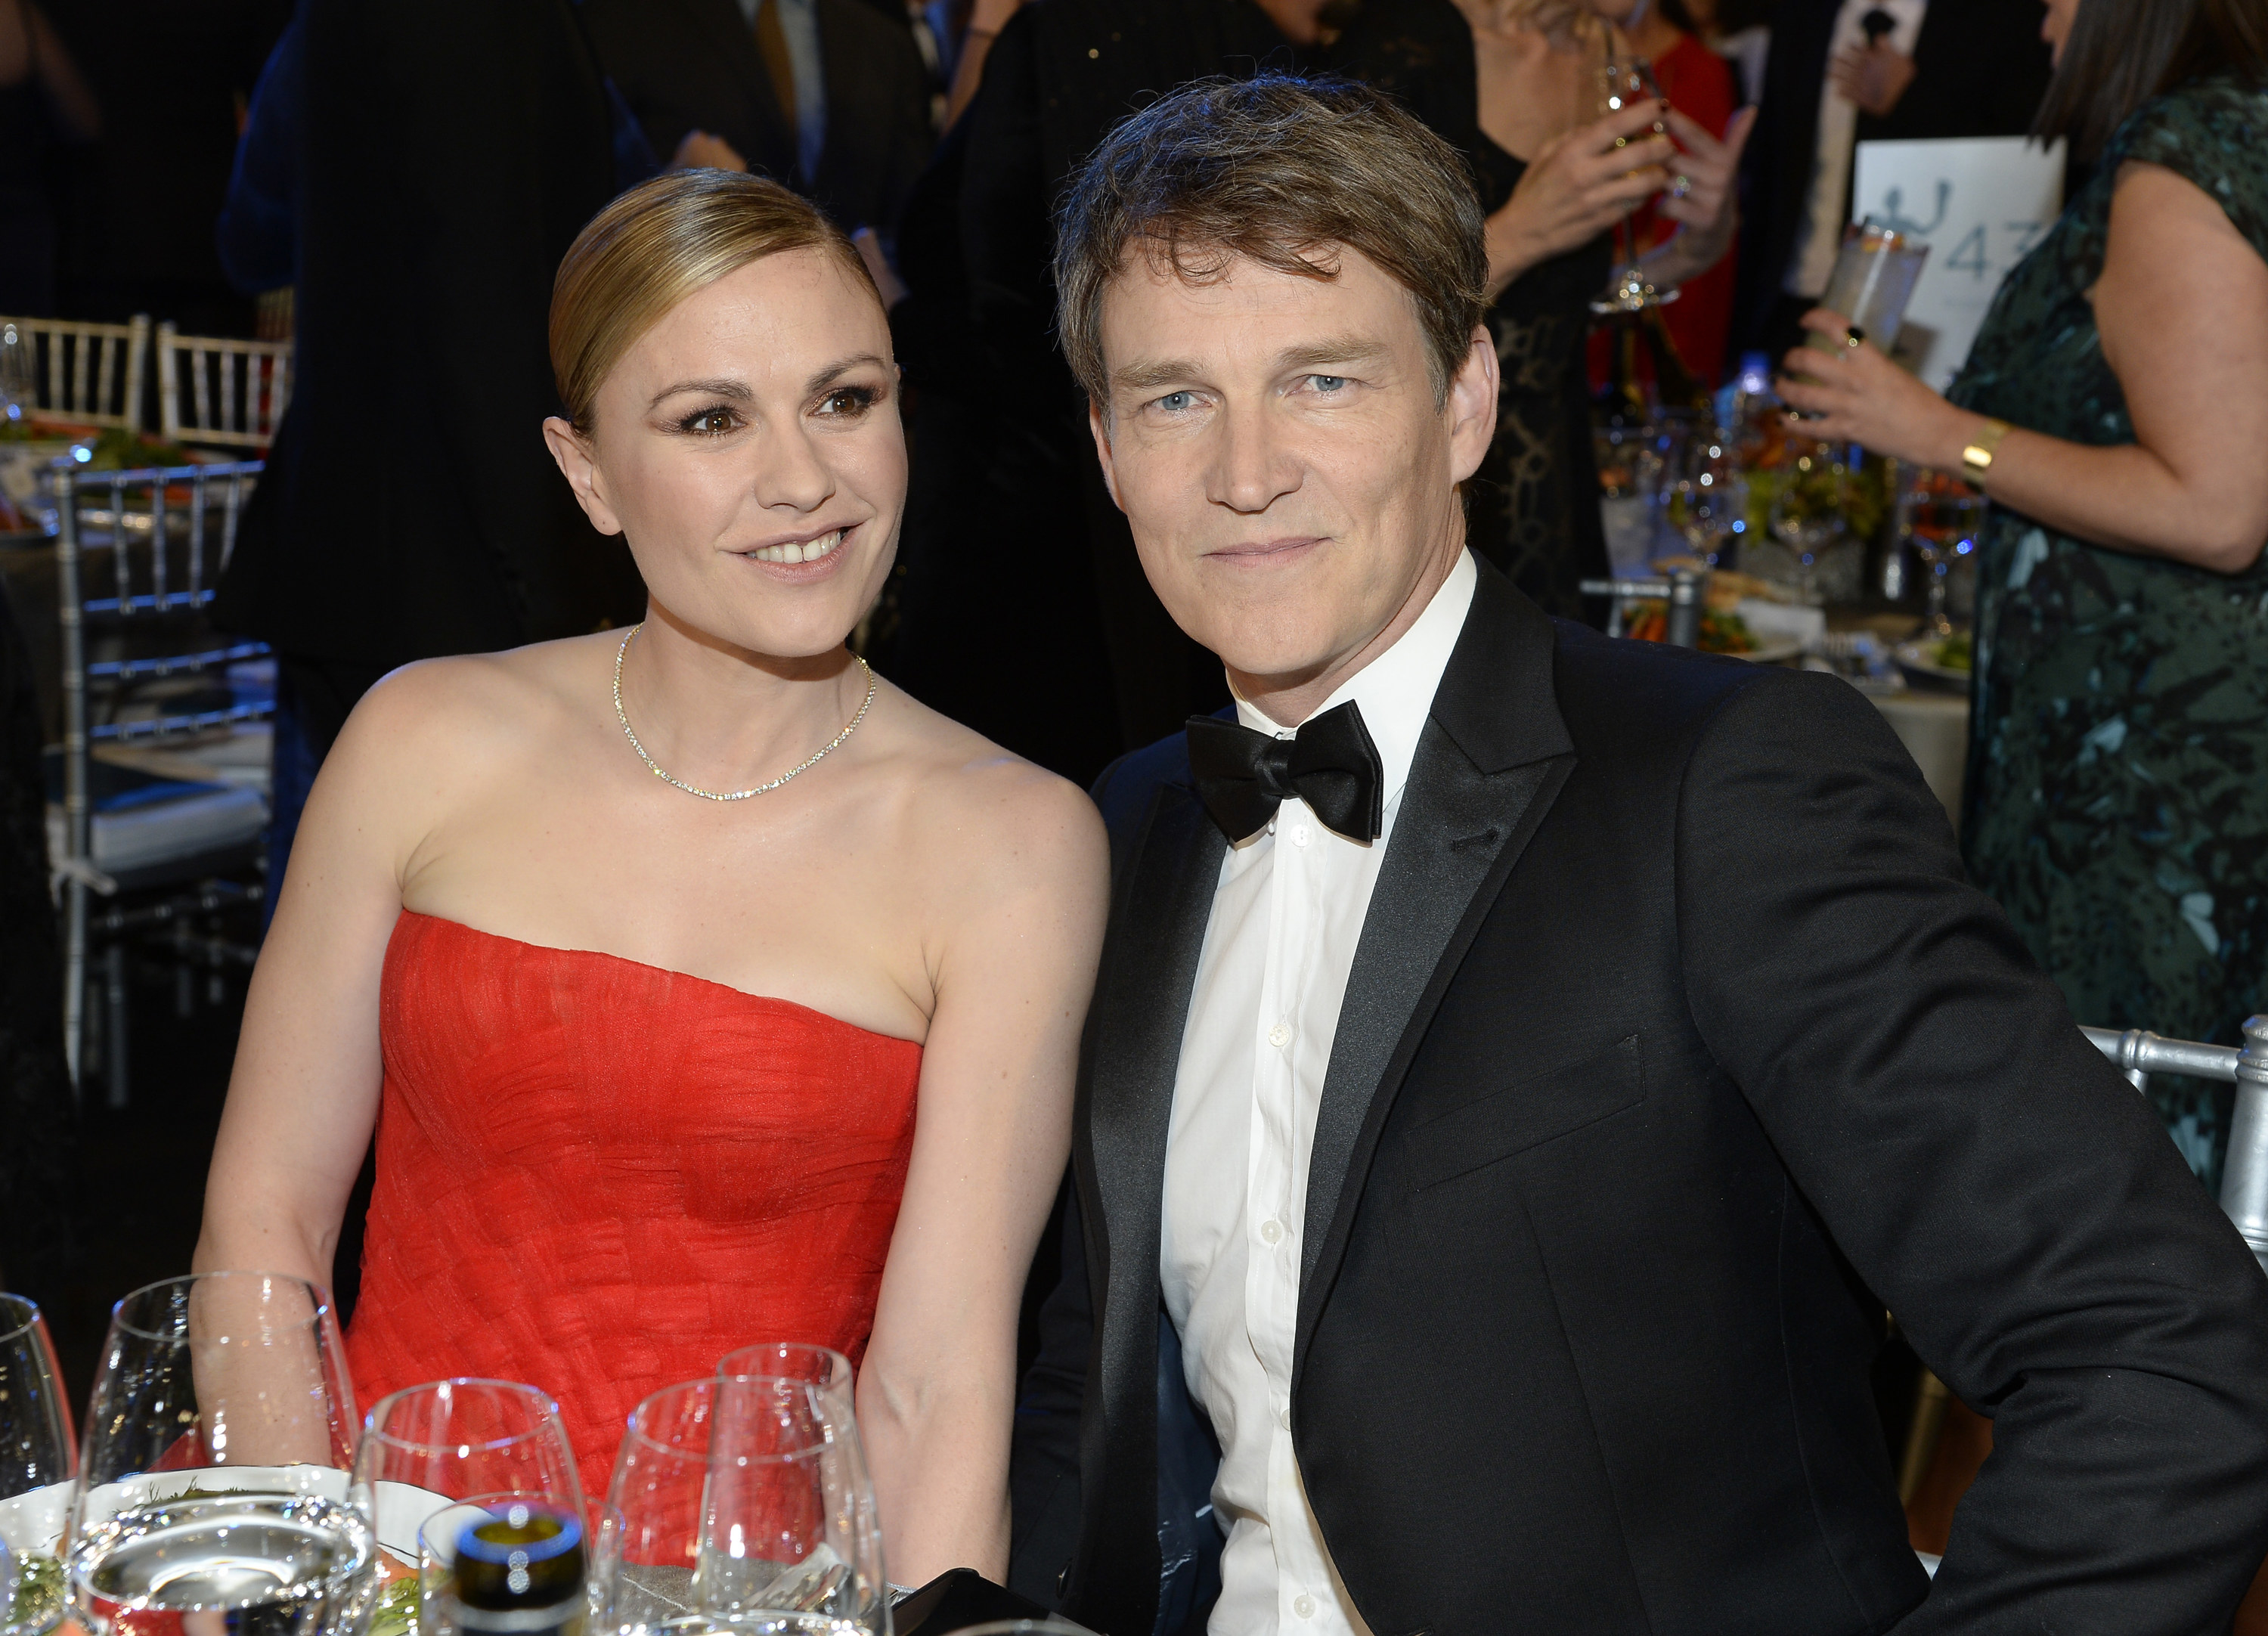 Anna Paquin and Stephen Moyer at the Screen Actors Guild Awards in 2020